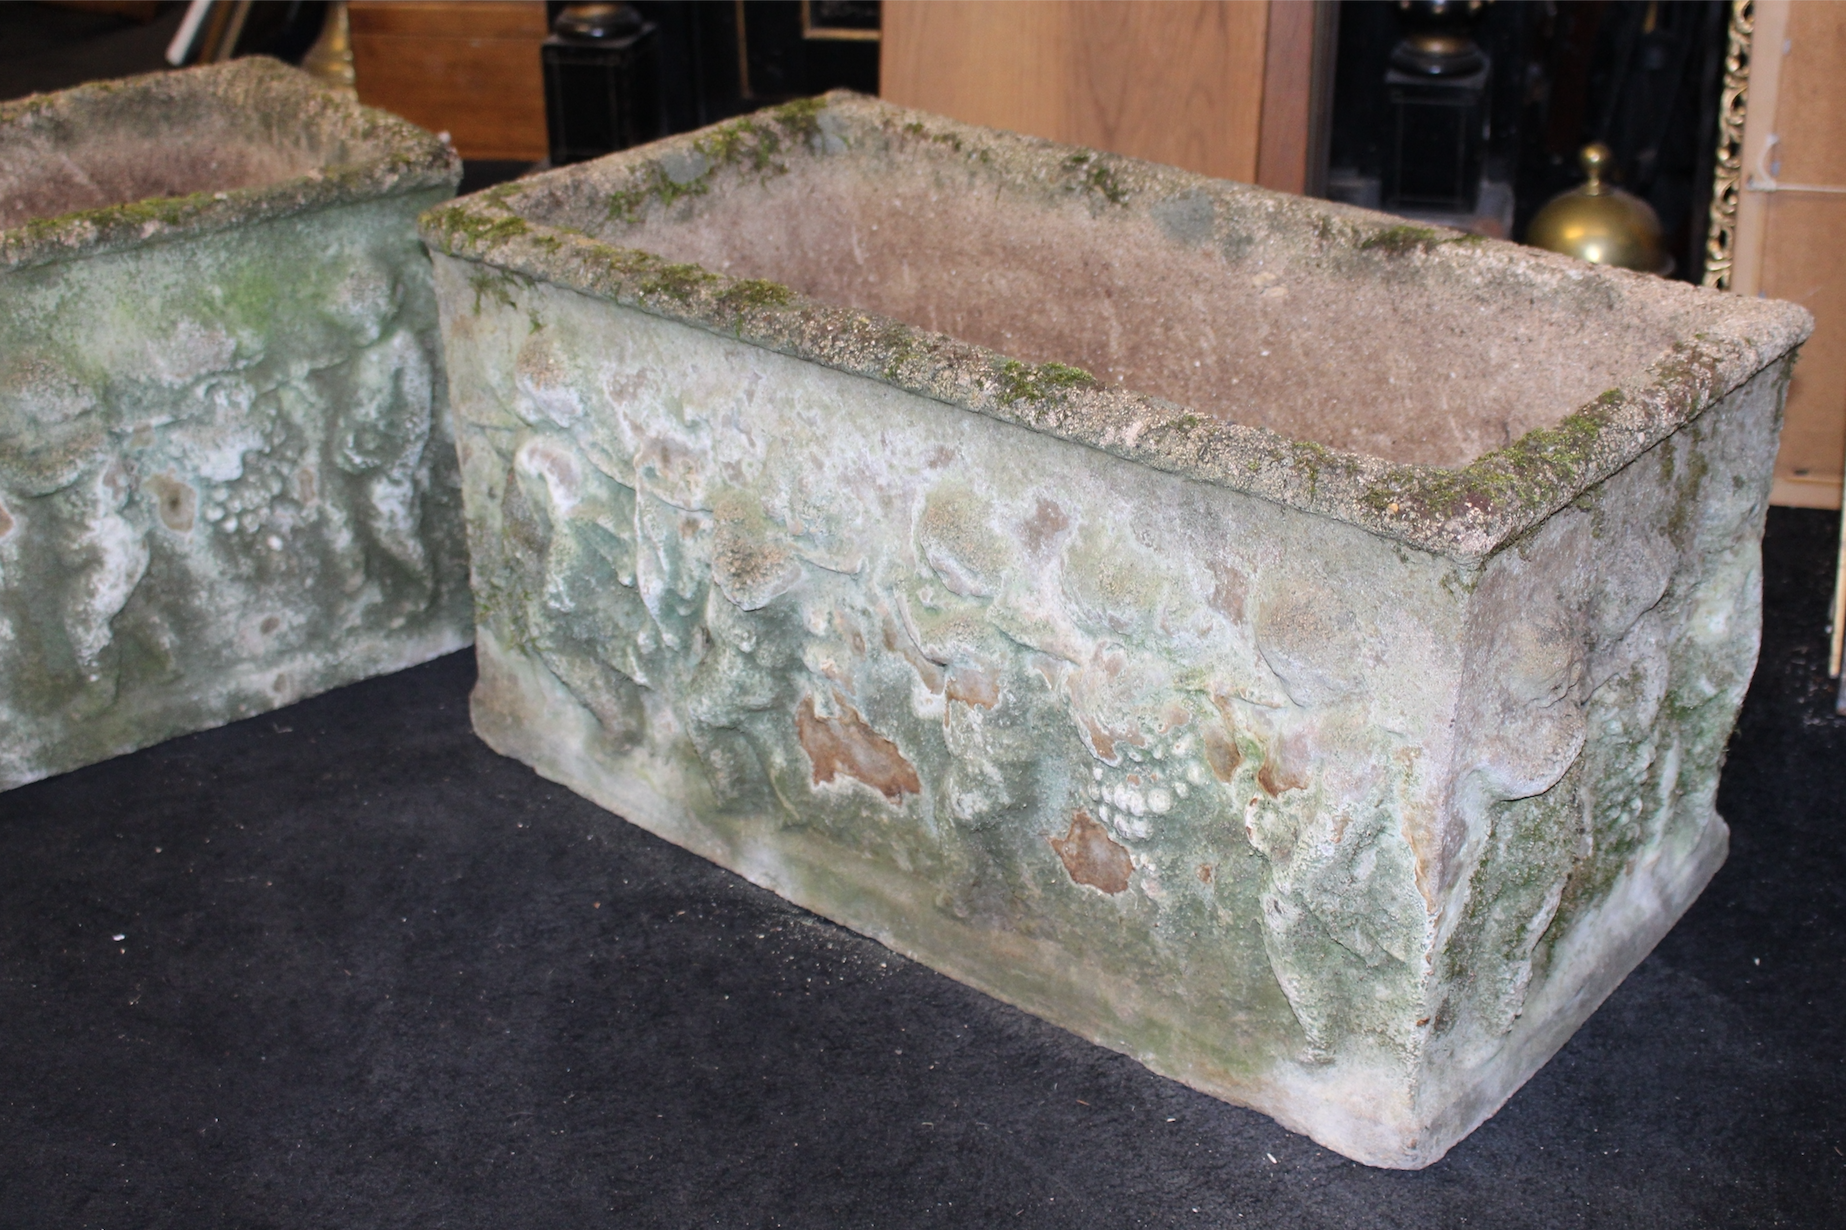 Pair of Old Reconstituted Cherubic Garden Planter Troughs - Image 2 of 4